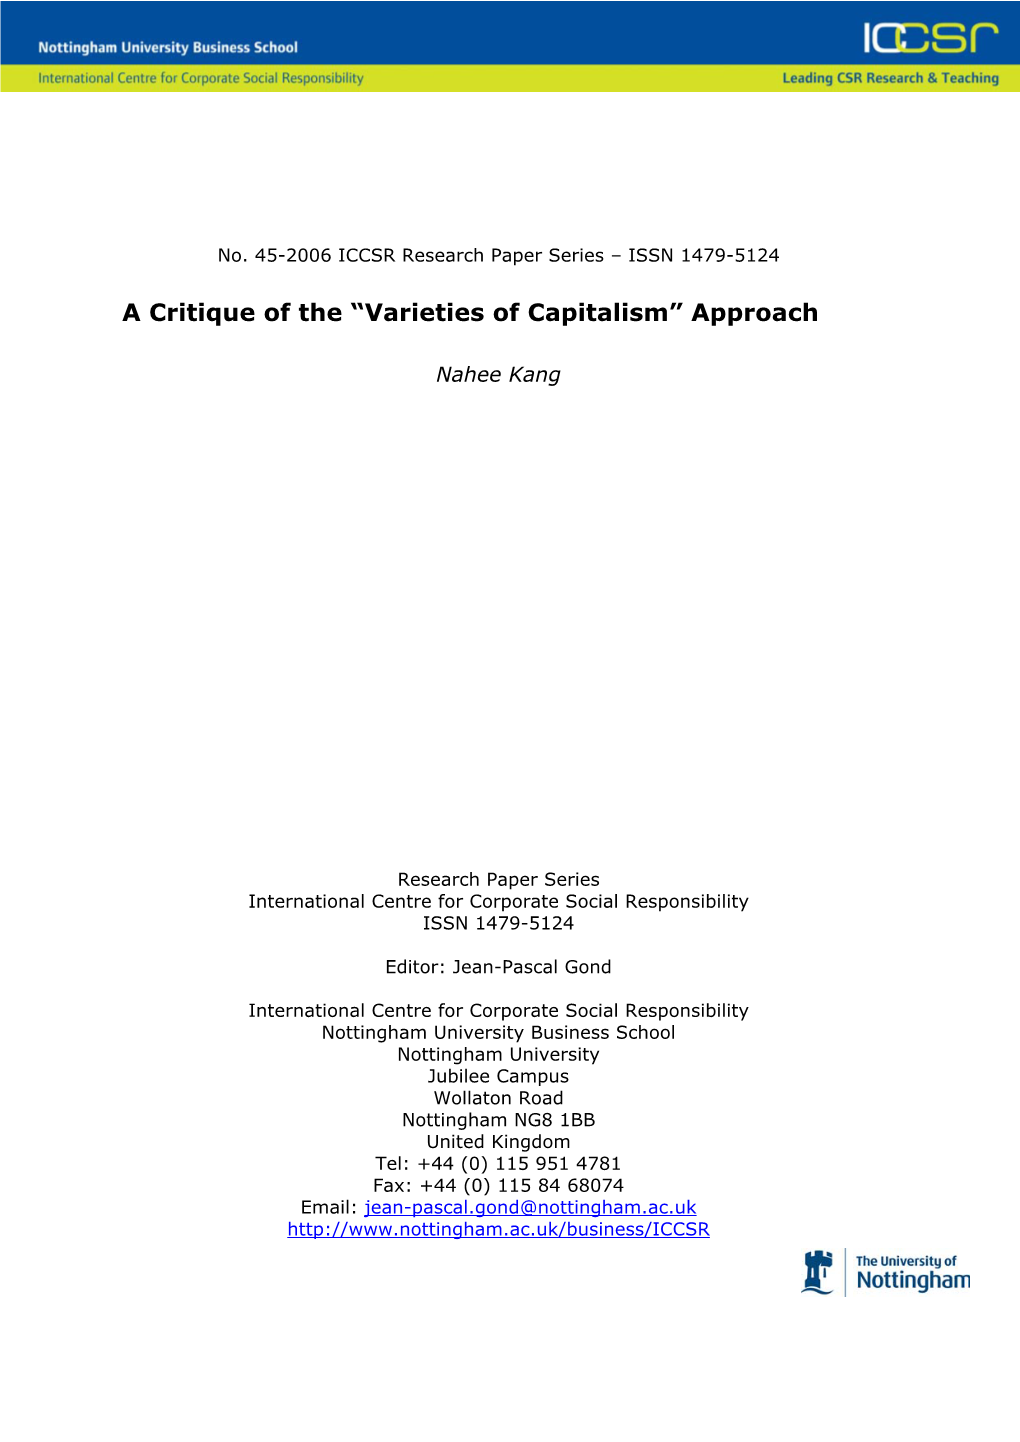 A Critique of the “Varieties of Capitalism” Approach